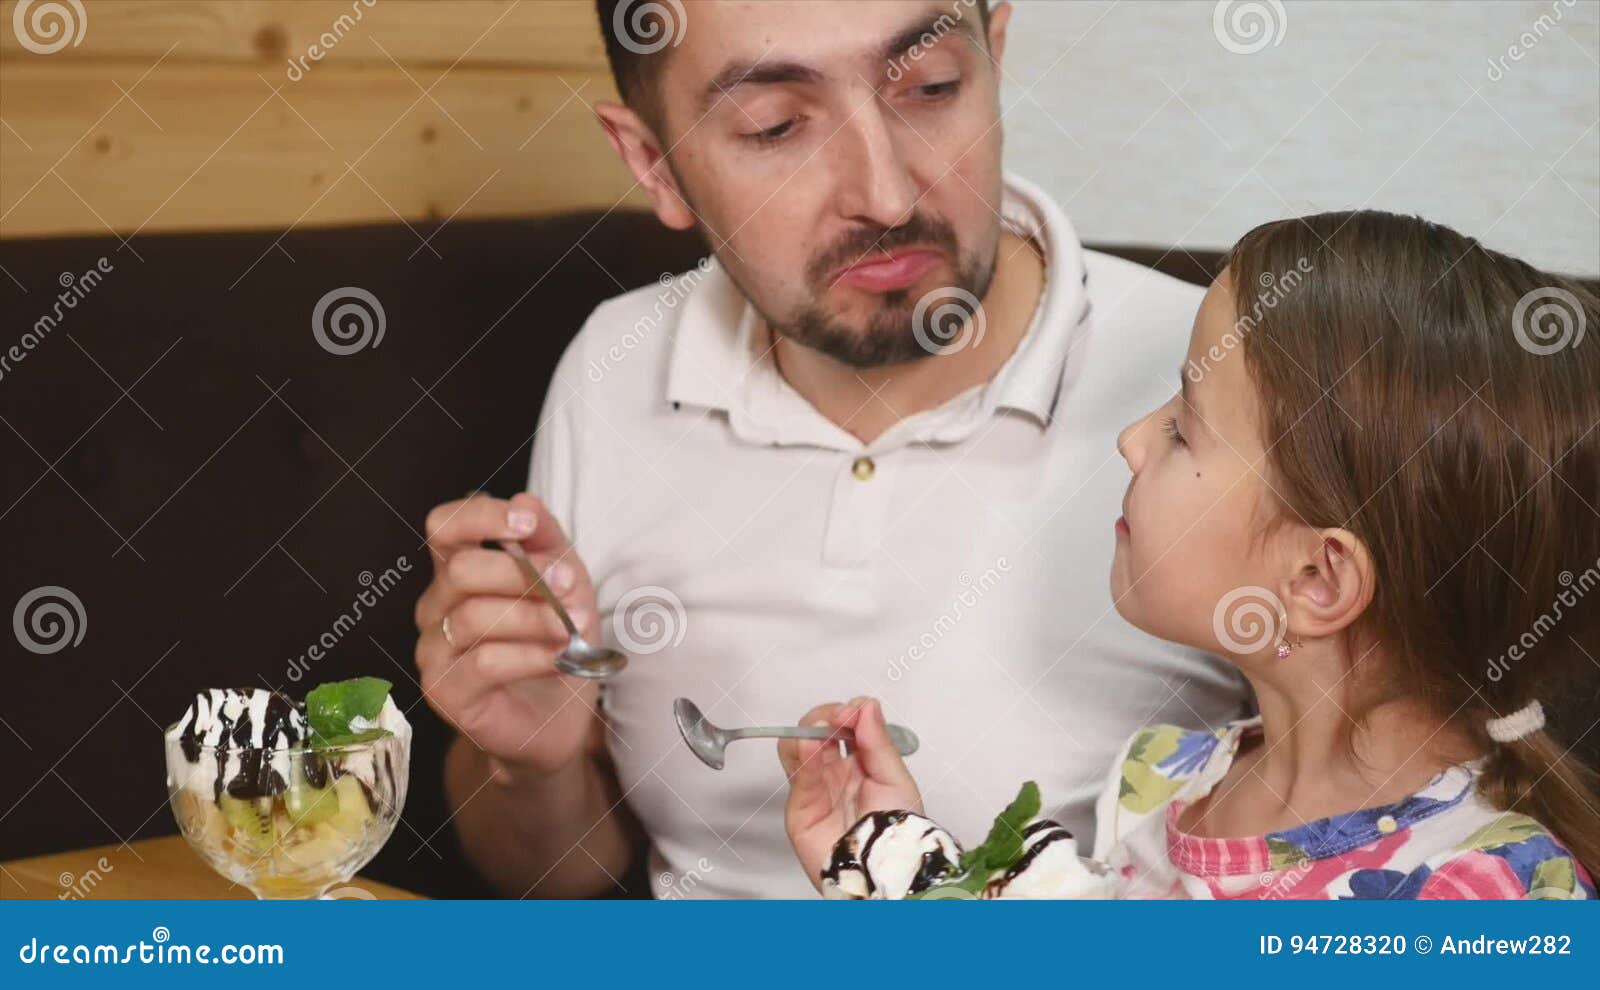 Father eating daughters pussy pics